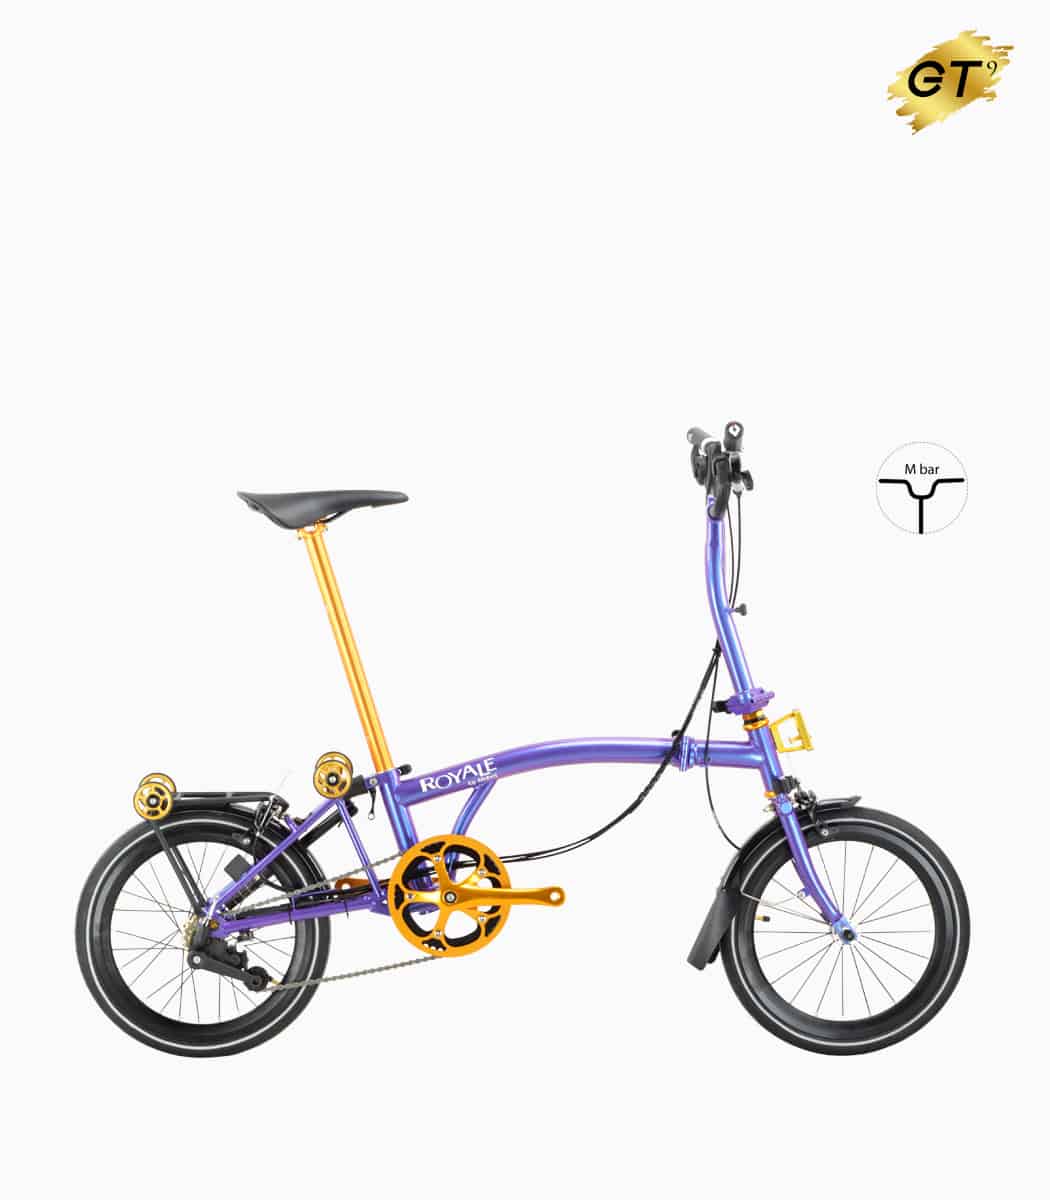 MOBOT ROYALE GT M9 (METALLIC PURPLE) foldable bicycle gold edition right